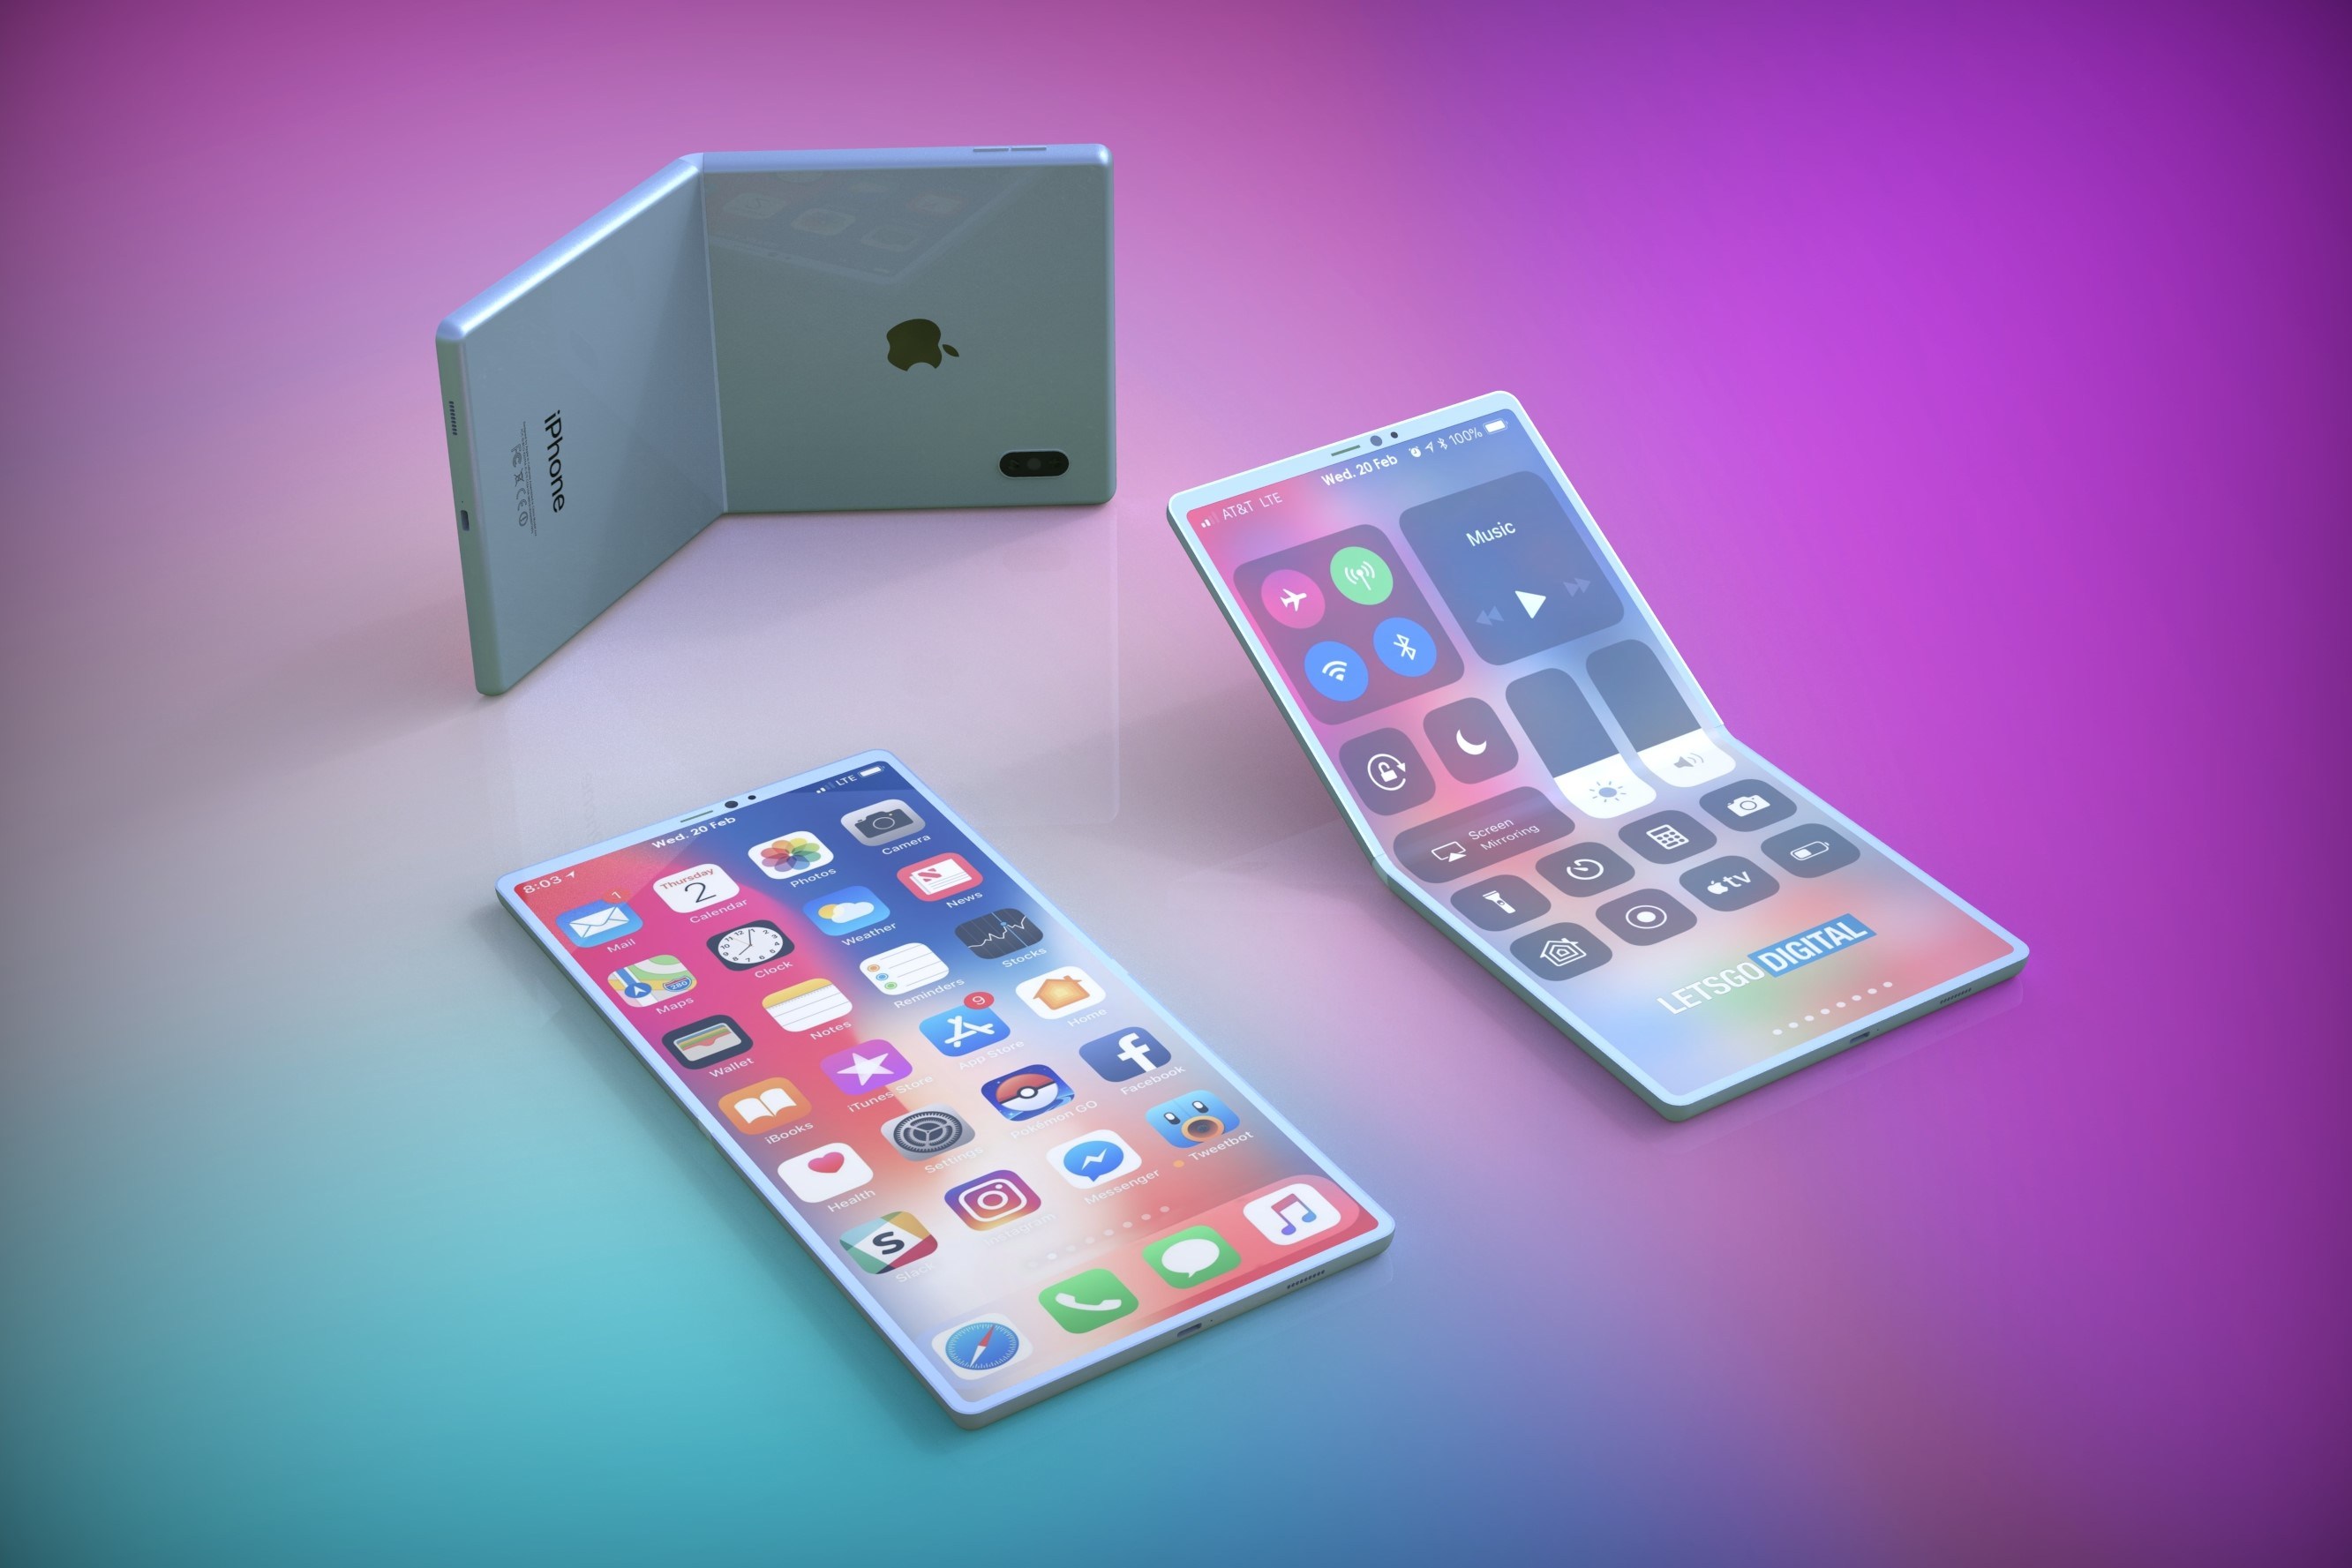 This-is-what-Apples-foldable-smartphone-could-look-like.jpg